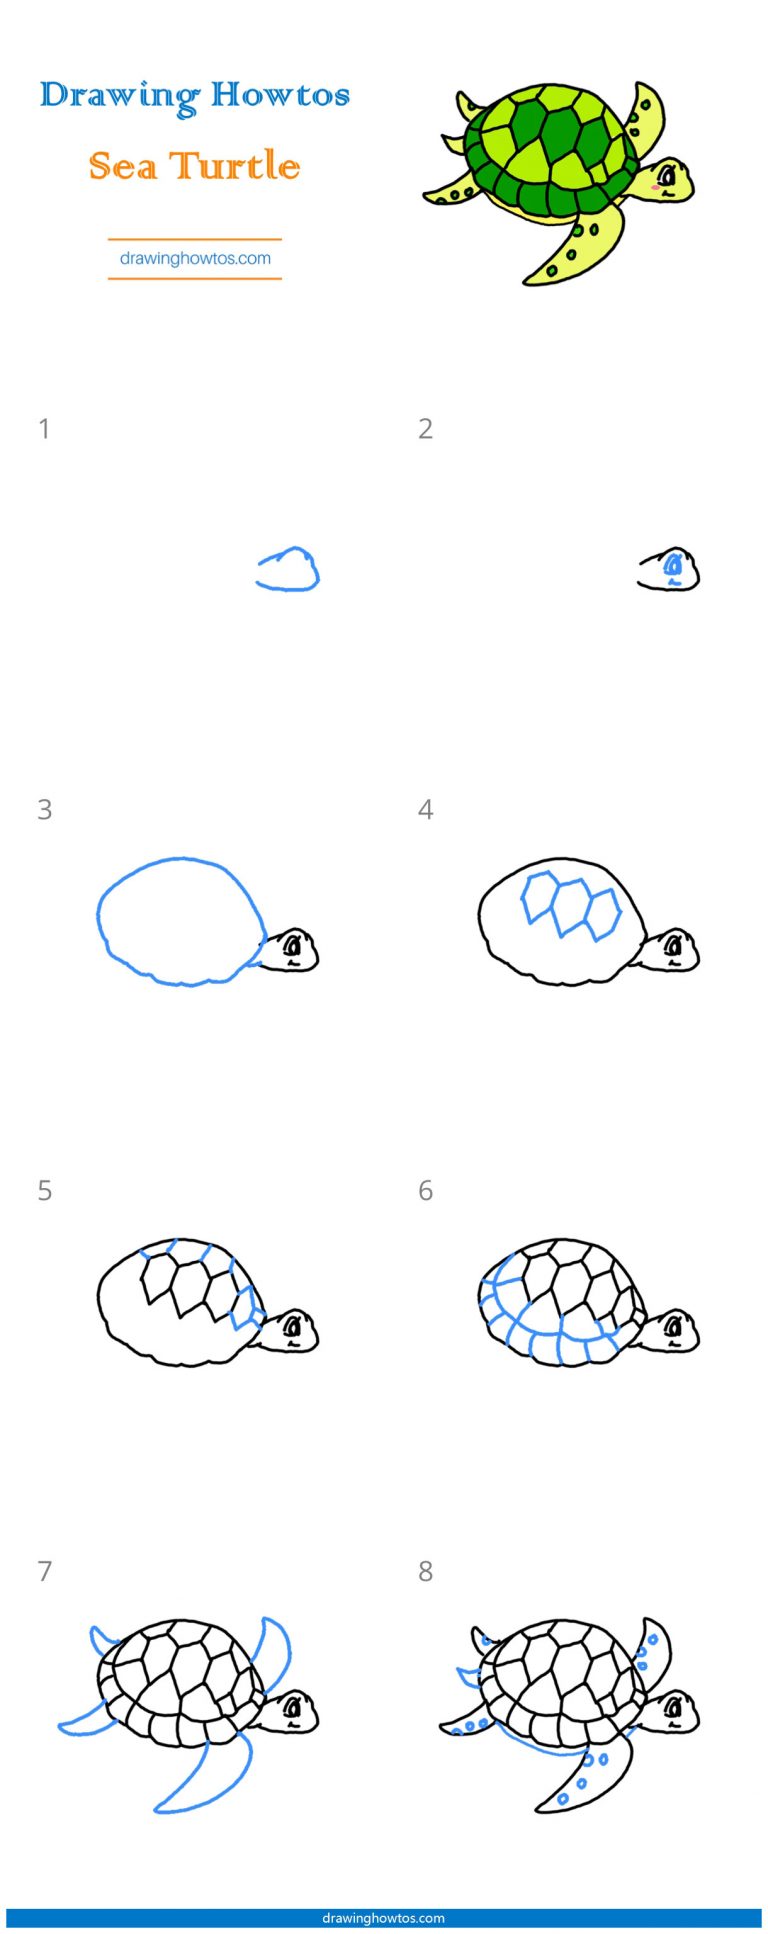 How to Draw a Sea Turtle Step by Step Easy Drawing